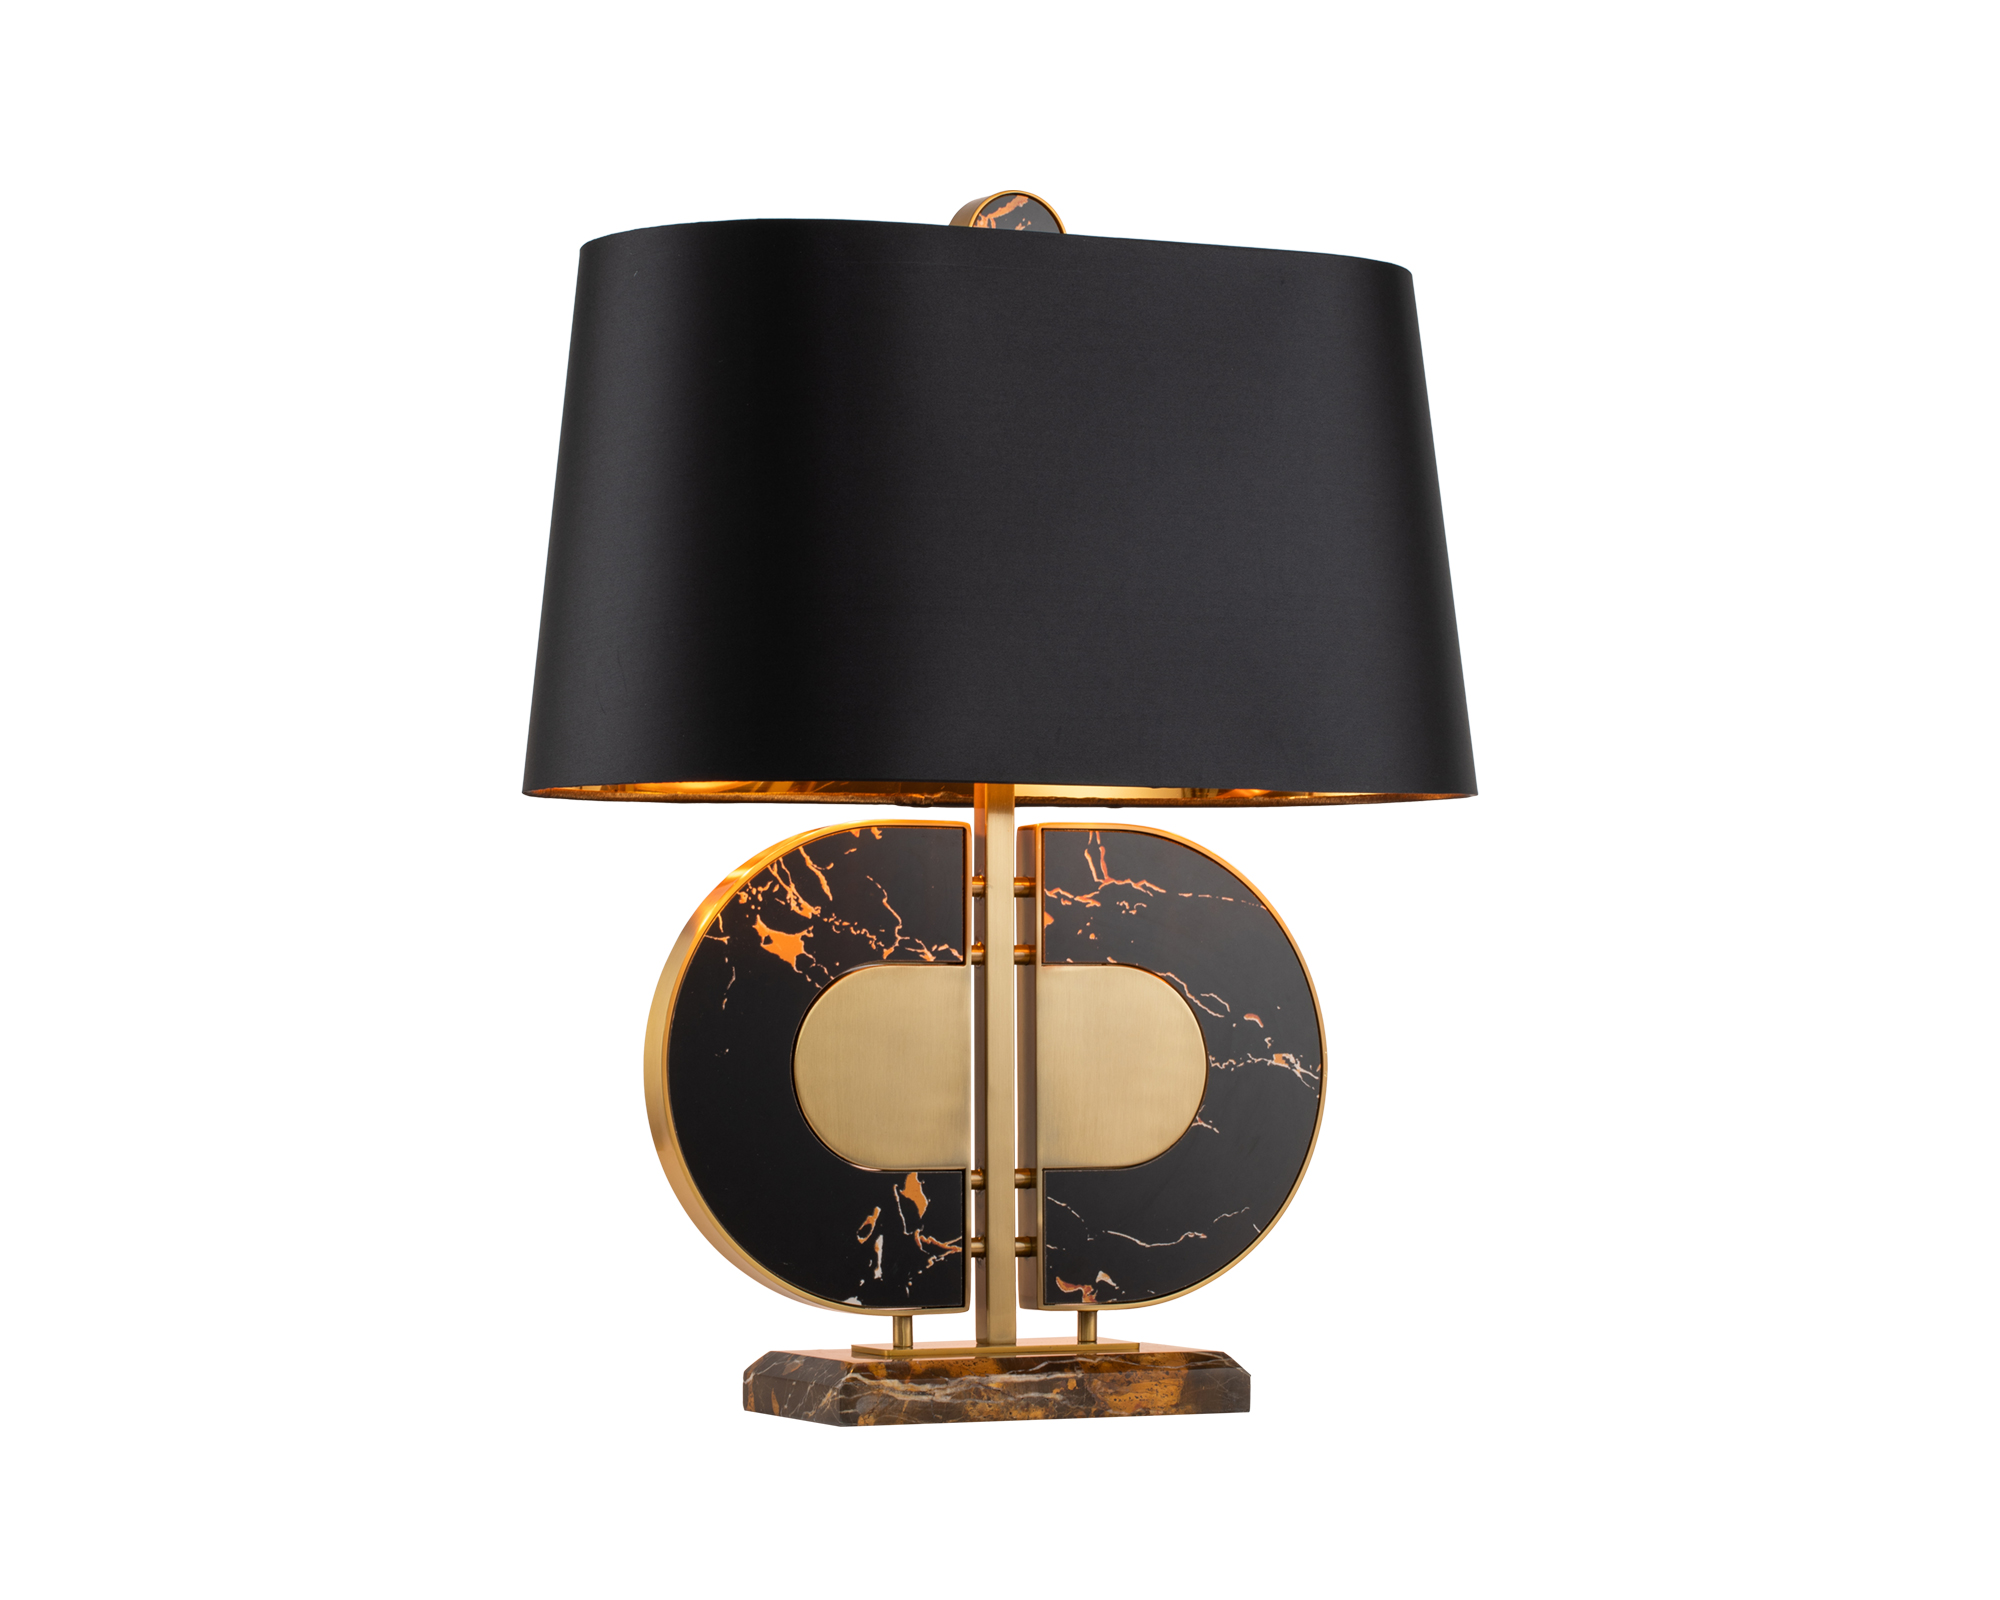 Coleman Table Lamp Liang Eimil, Antique Coleman Table Lamp